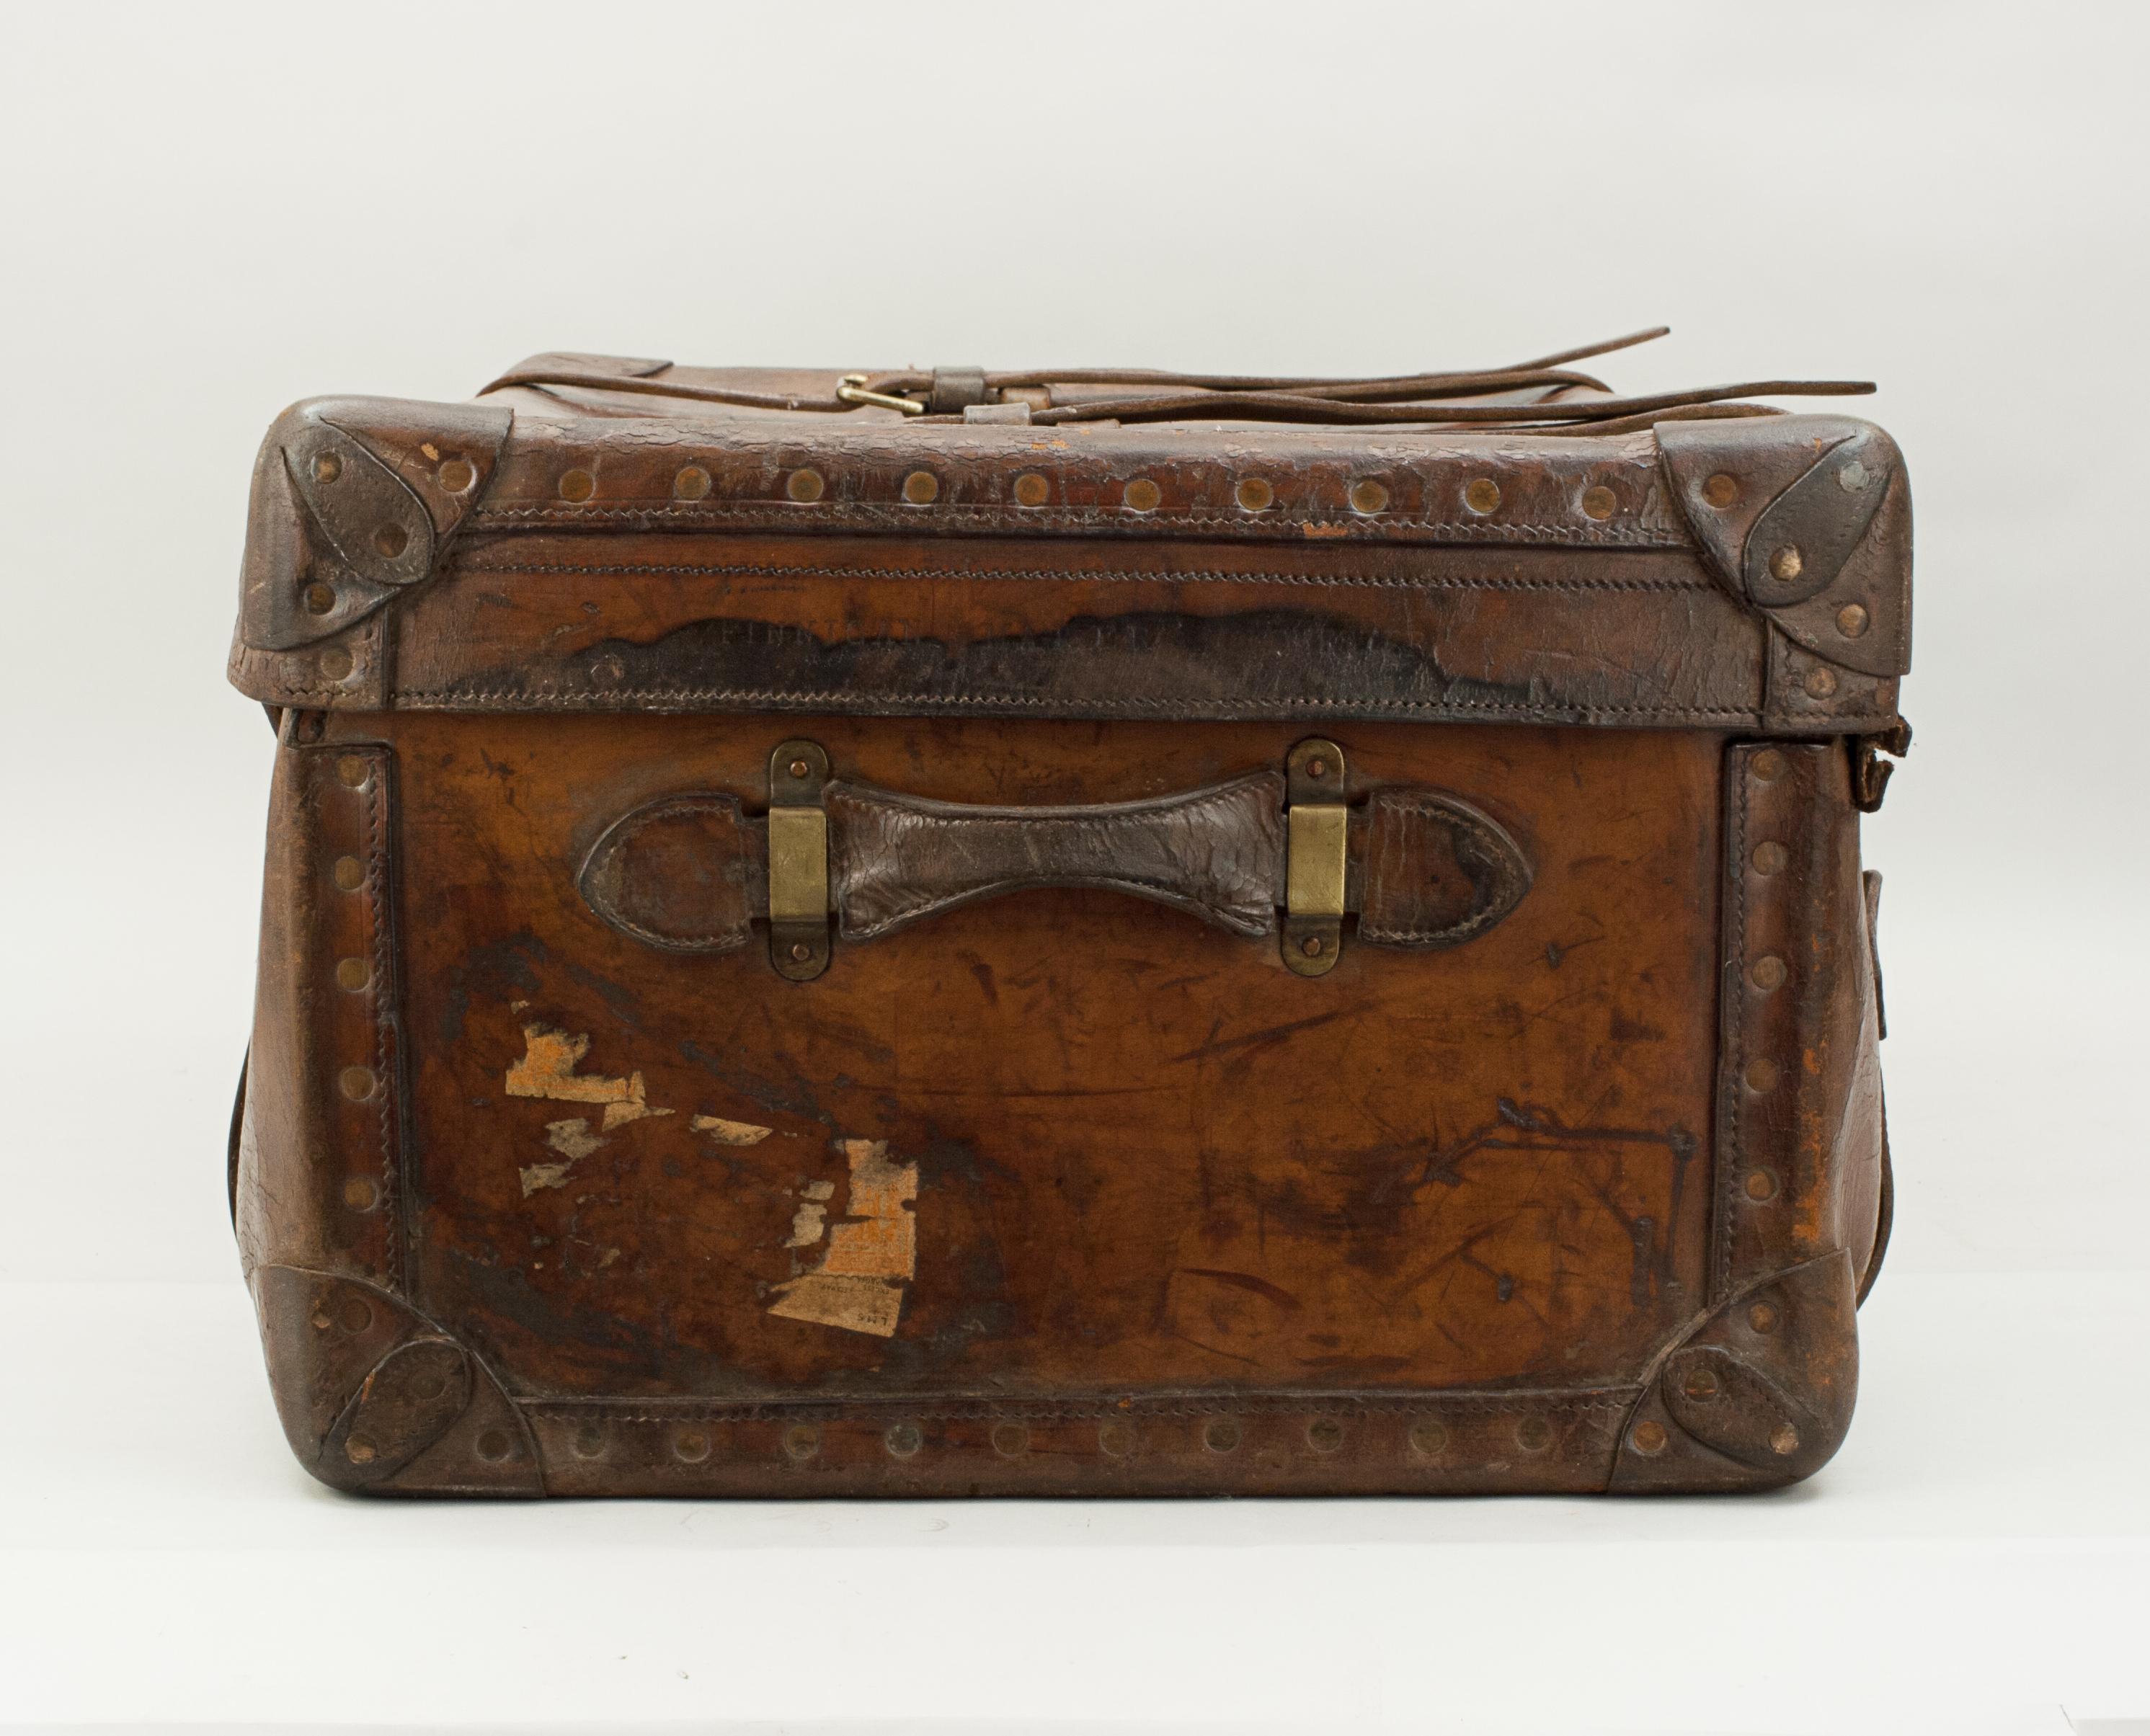 Victorian Antique Leather Trunk by Finnigans, Bond Street, London Luggage